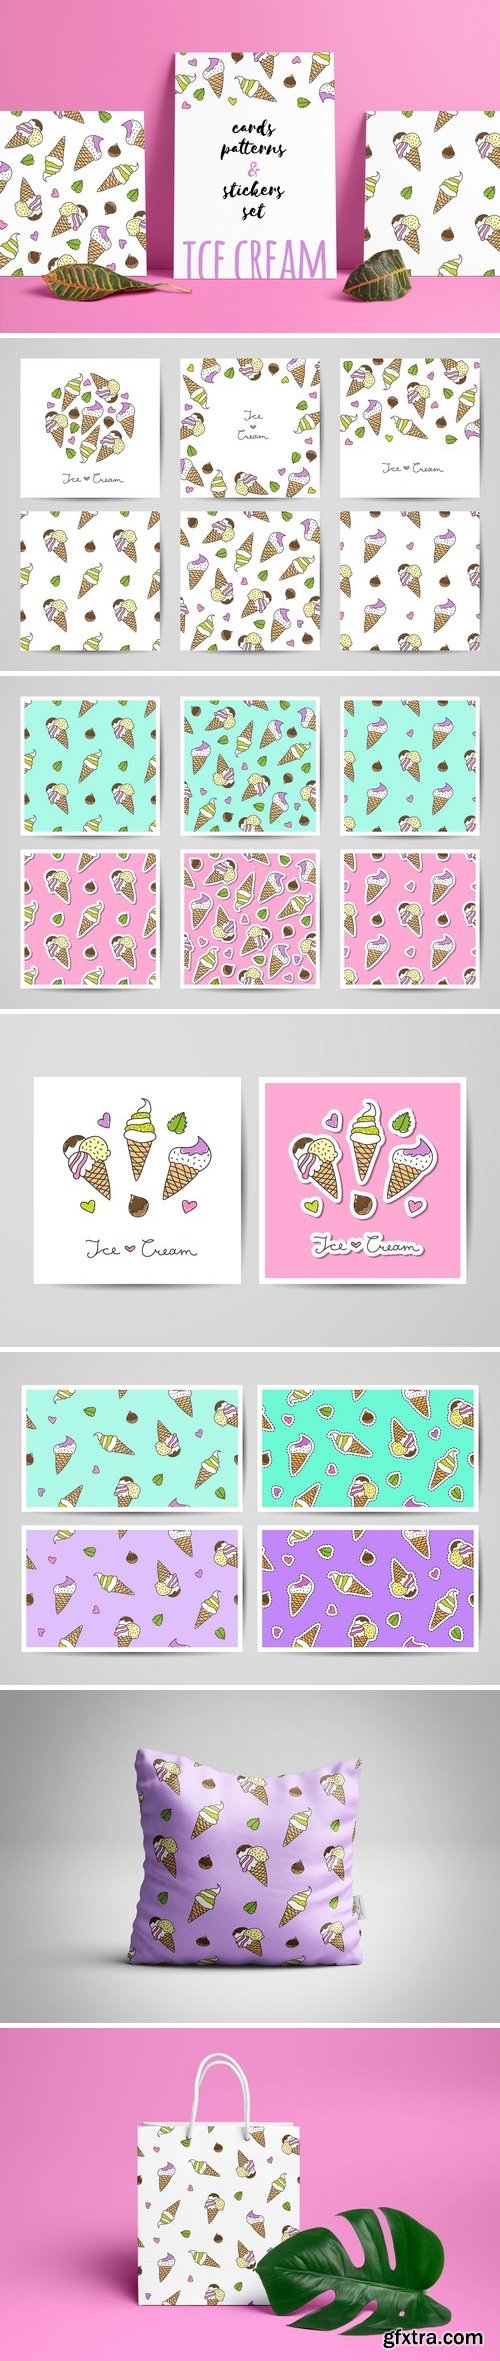 CM - Ice Cream patterns and cards 1521110